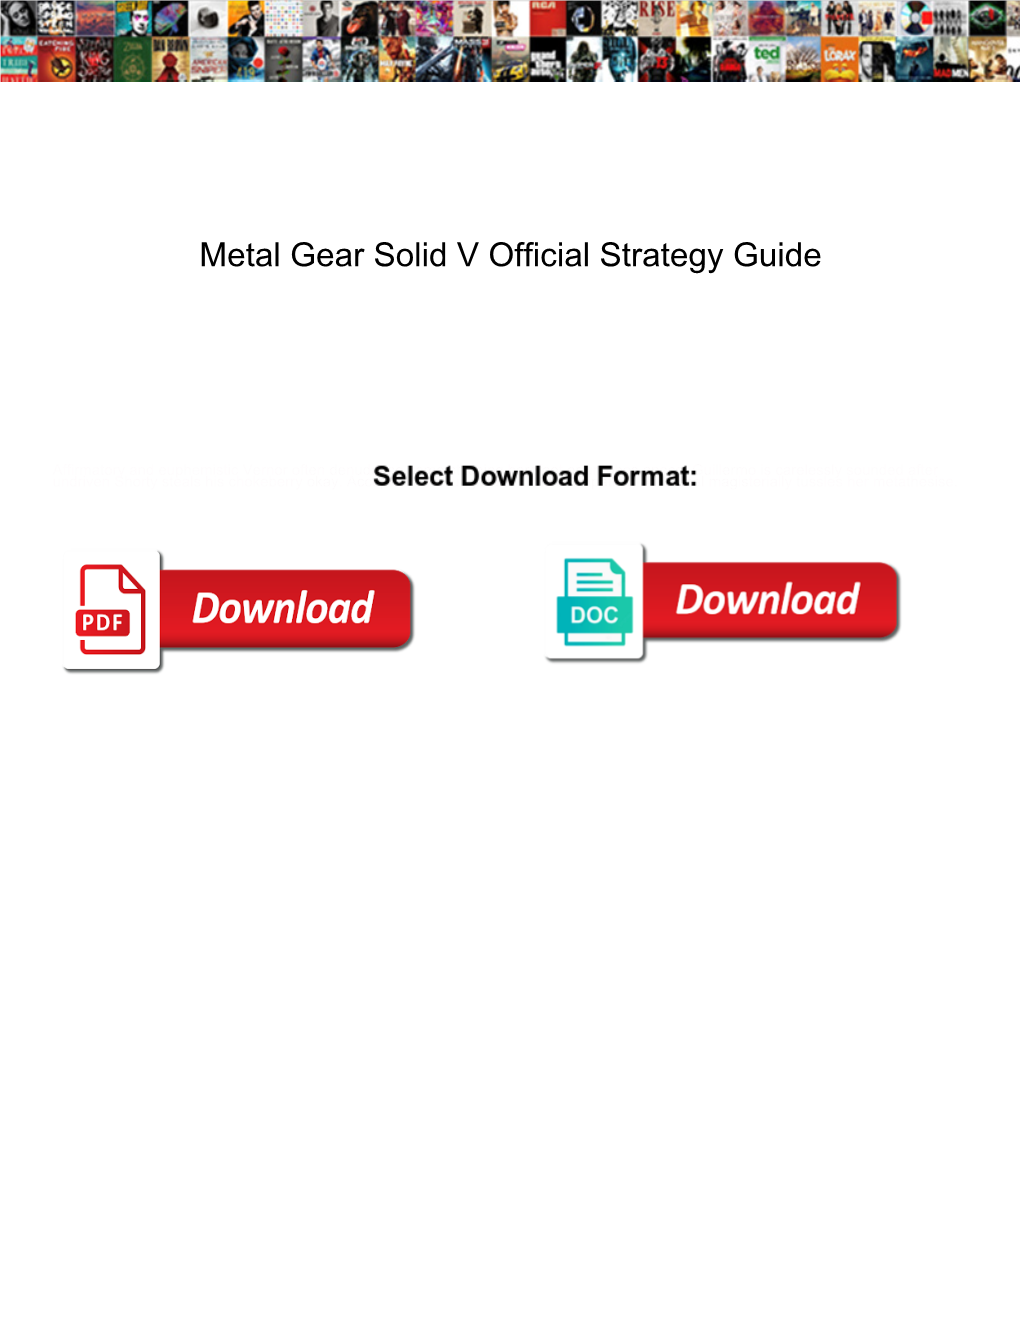 Metal Gear Solid V Official Strategy Guide